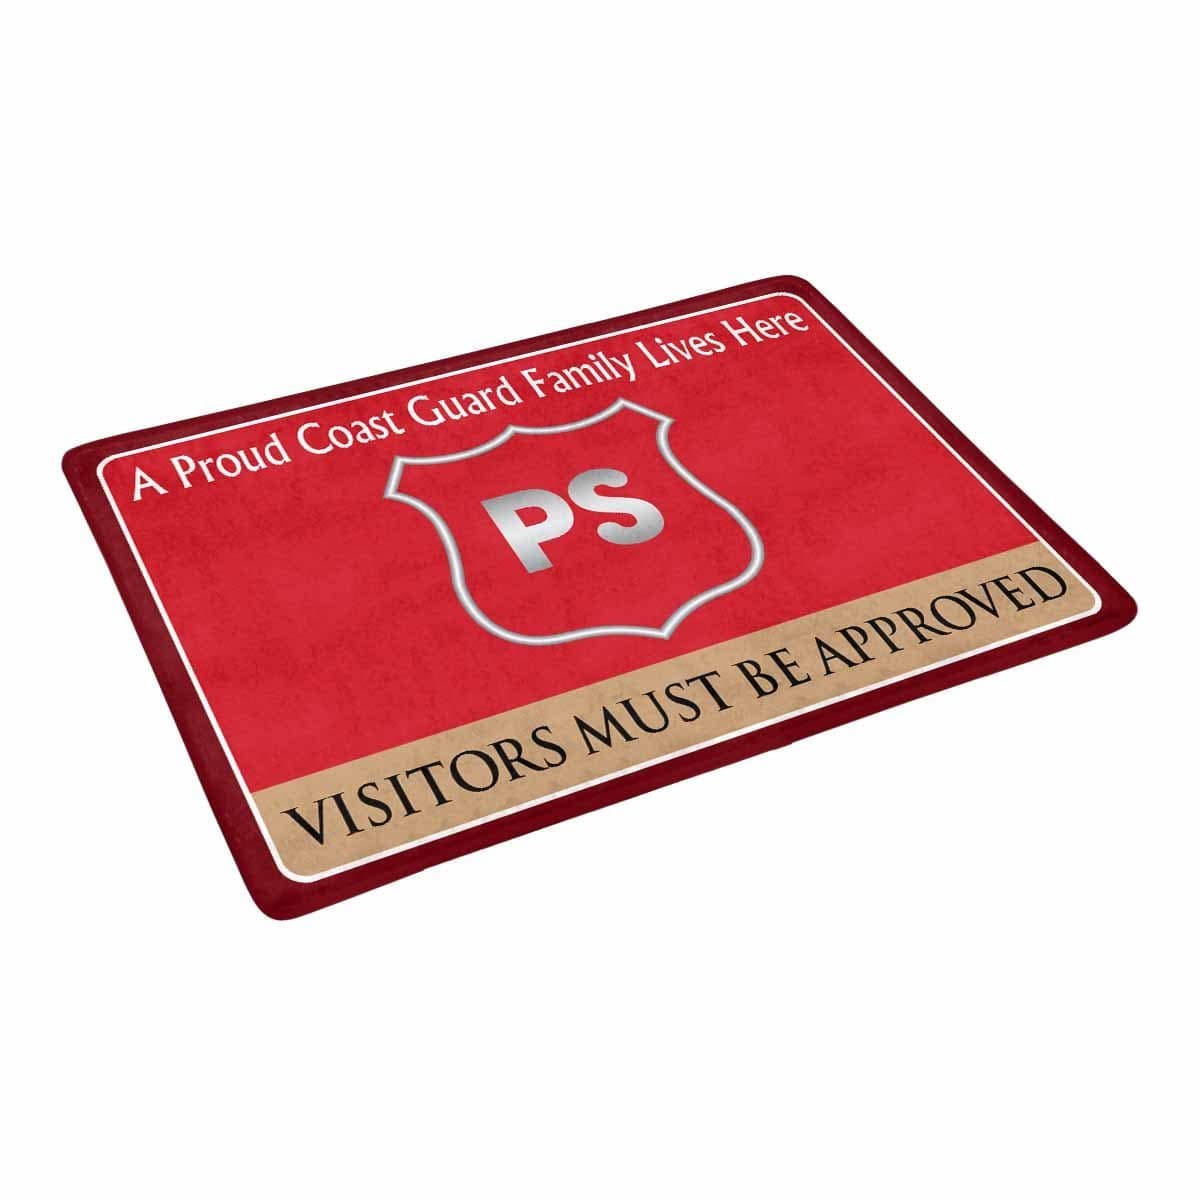 USCG PORT SECURITY SPECIALIST PS Logo Family Doormat - Visitors must be approved (23.6 inches x 15.7 inches)-Doormat-USCG-Rate-Veterans Nation